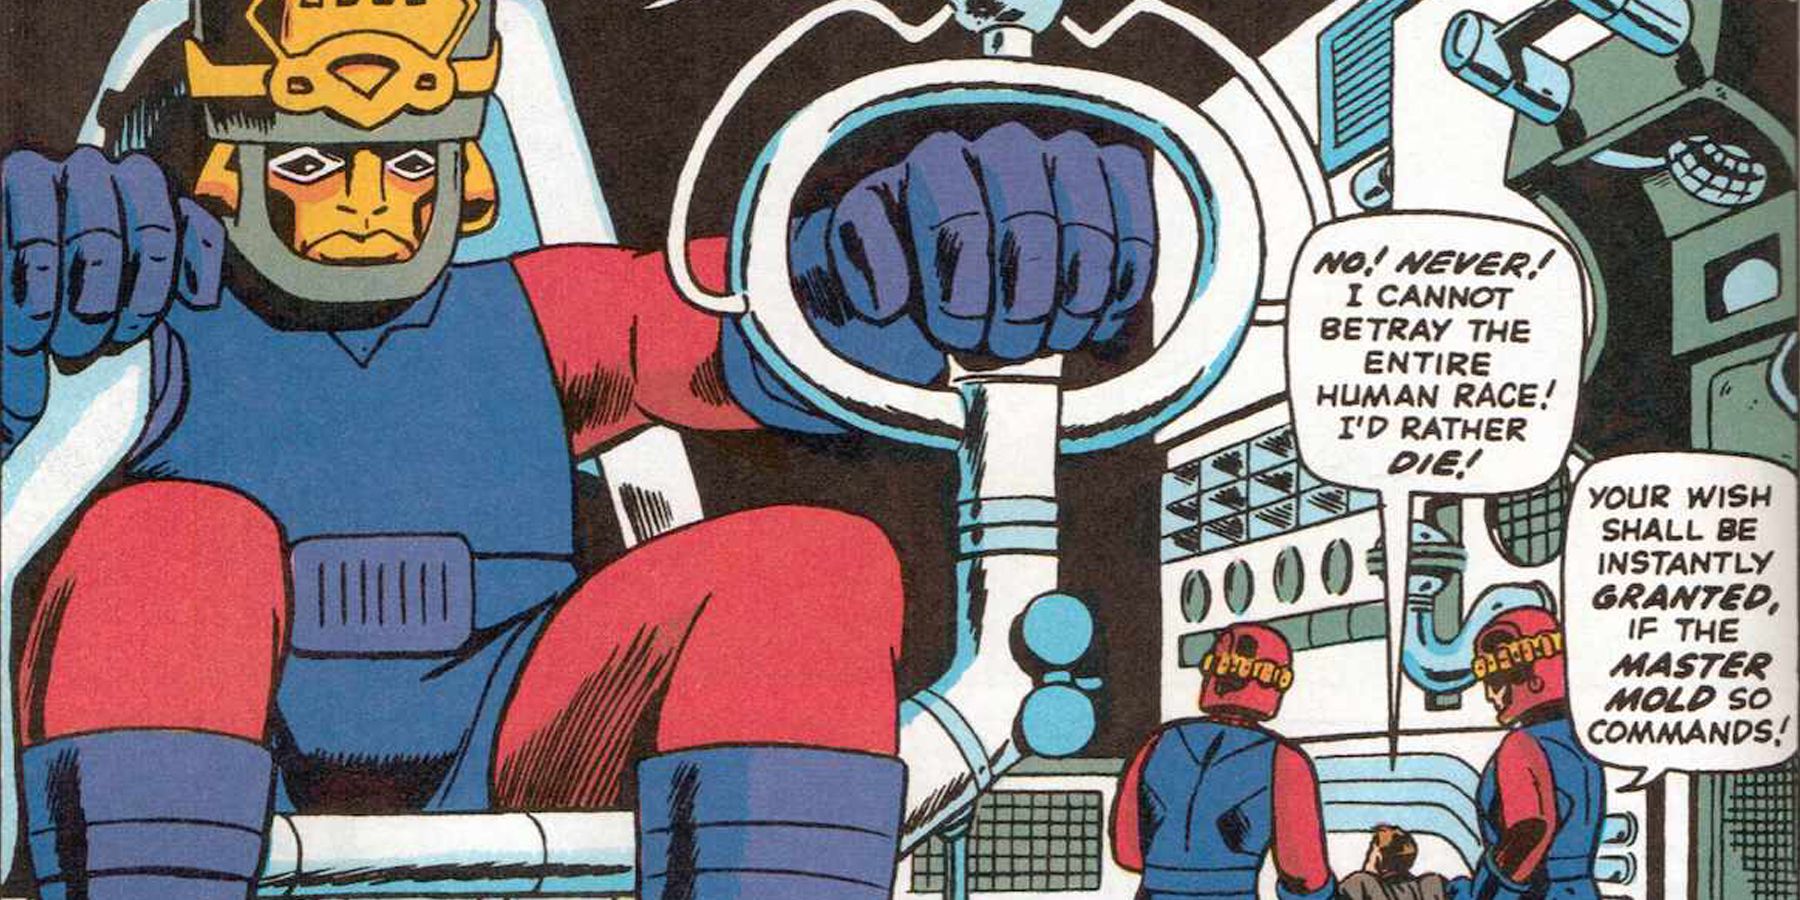 Master Mold and Sentinels in X-Men comics